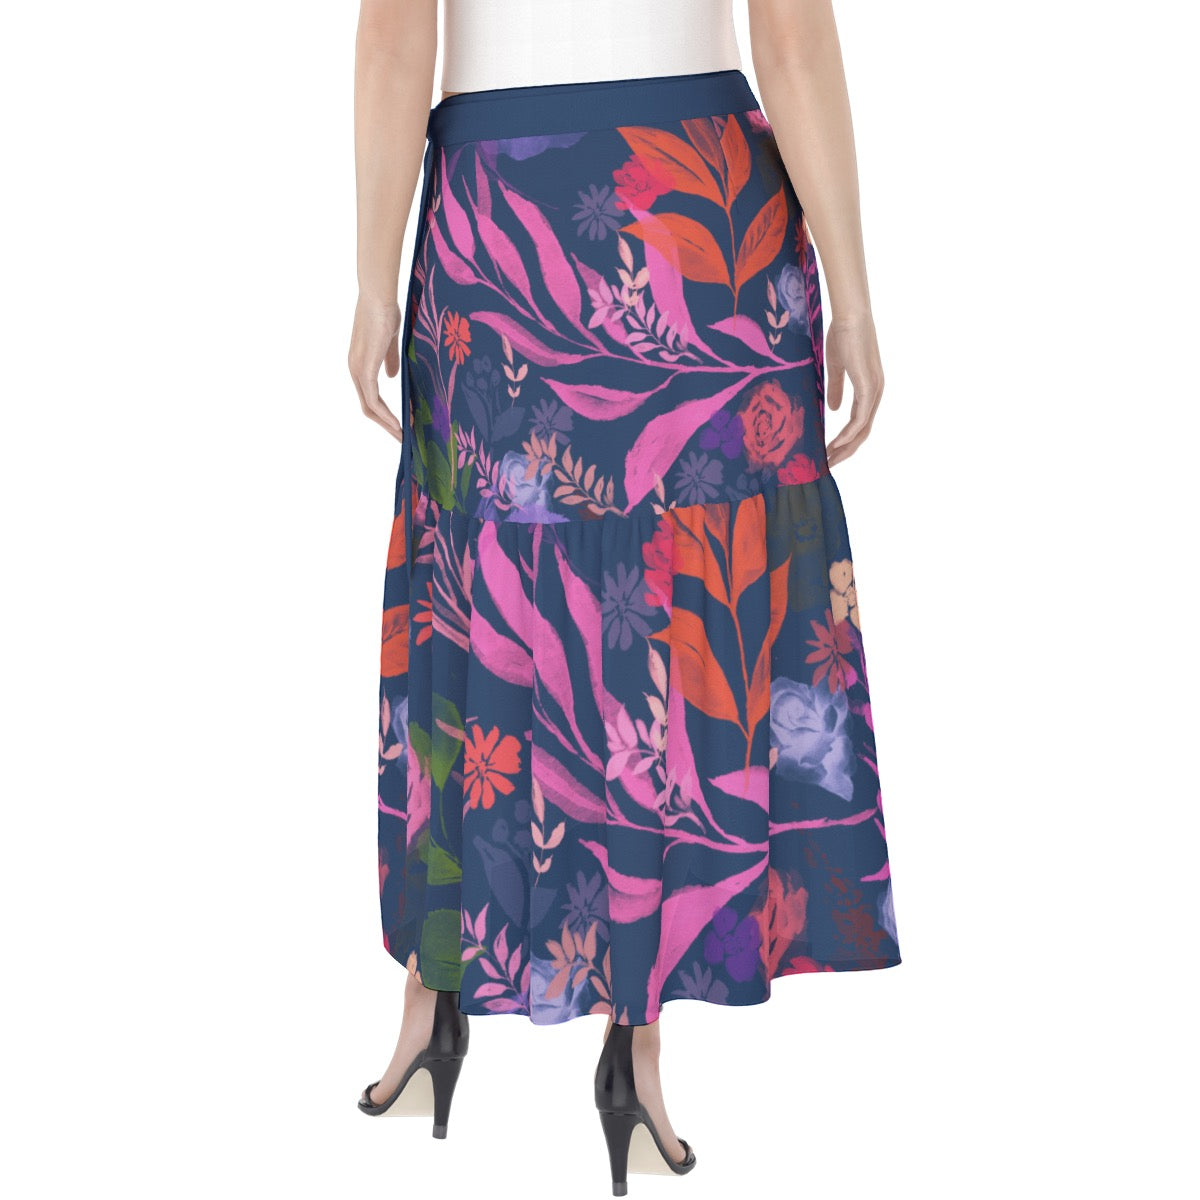 Multicolor Flowers Blue Women's Wrap Skirt. Houston Collection. Design hand-painted by the Designer